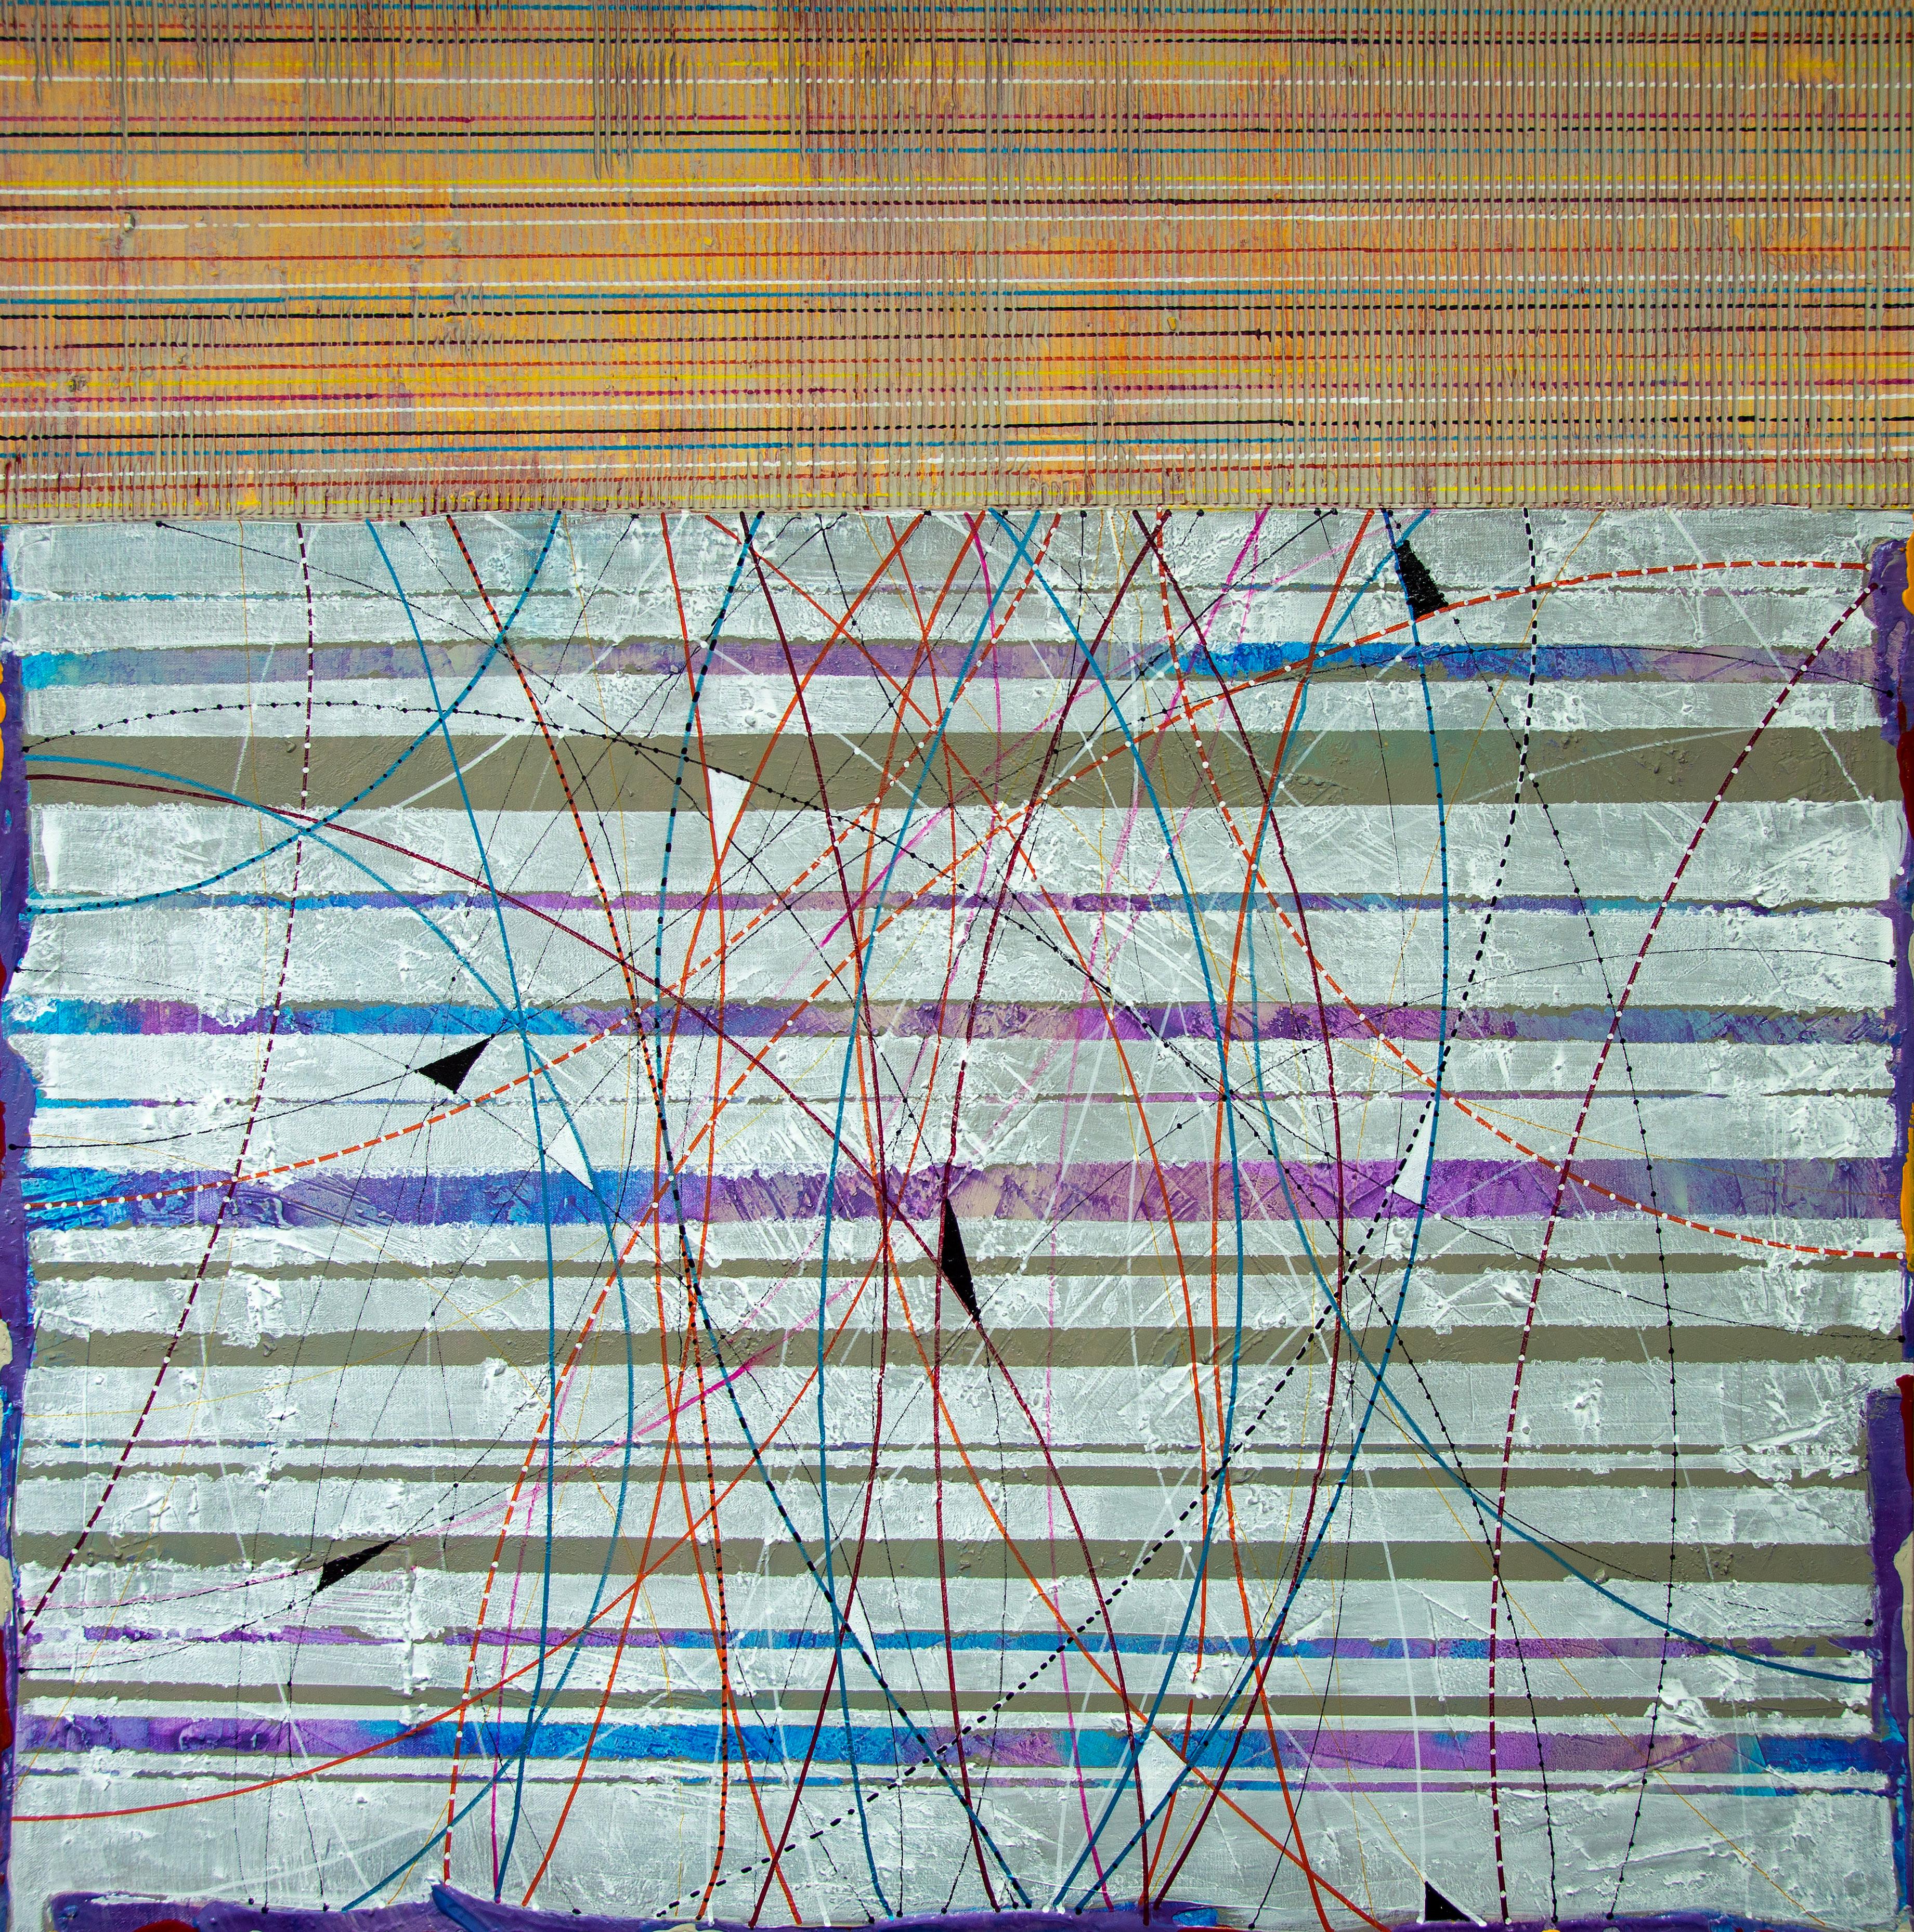 This 46.625 x 46.625 inch square acrylic mixed media painting by Larry Hefner depicts an abstract arrangement of lines and patterns. Hefner utilizes a wide range of colors in this work including various shades of purple, blue, yellow, red, orange,